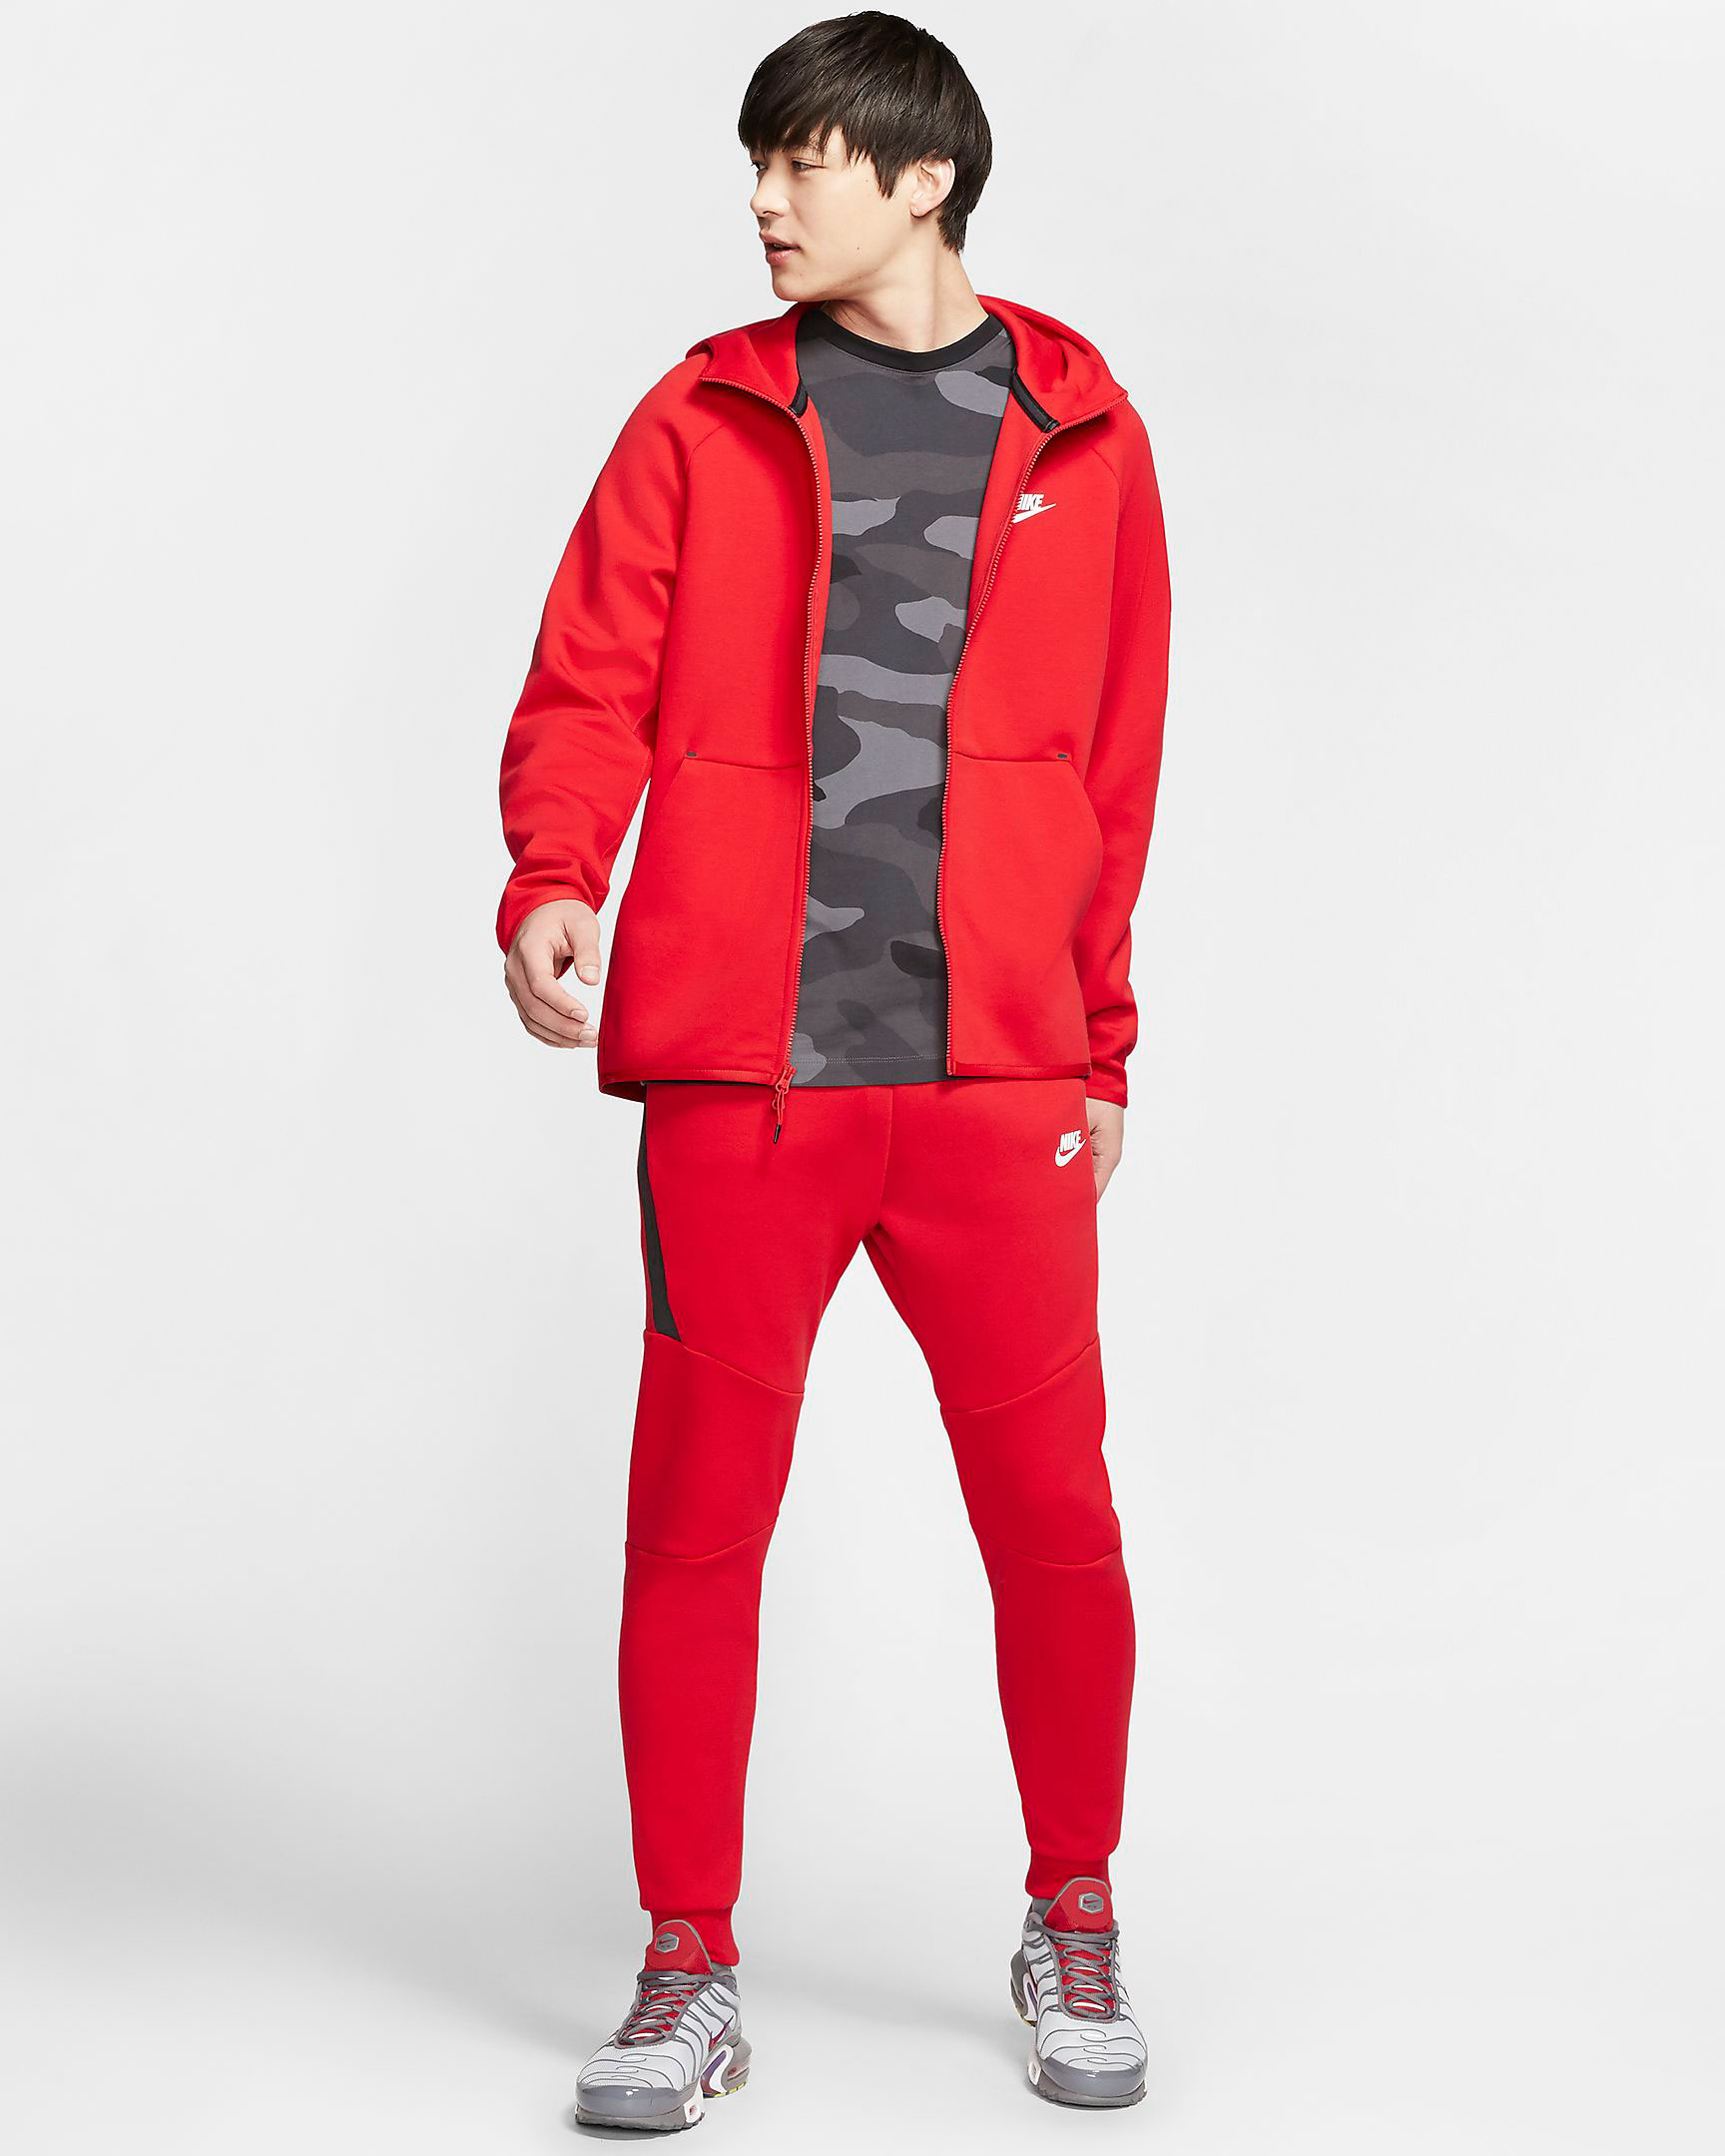 red and black nike outfit